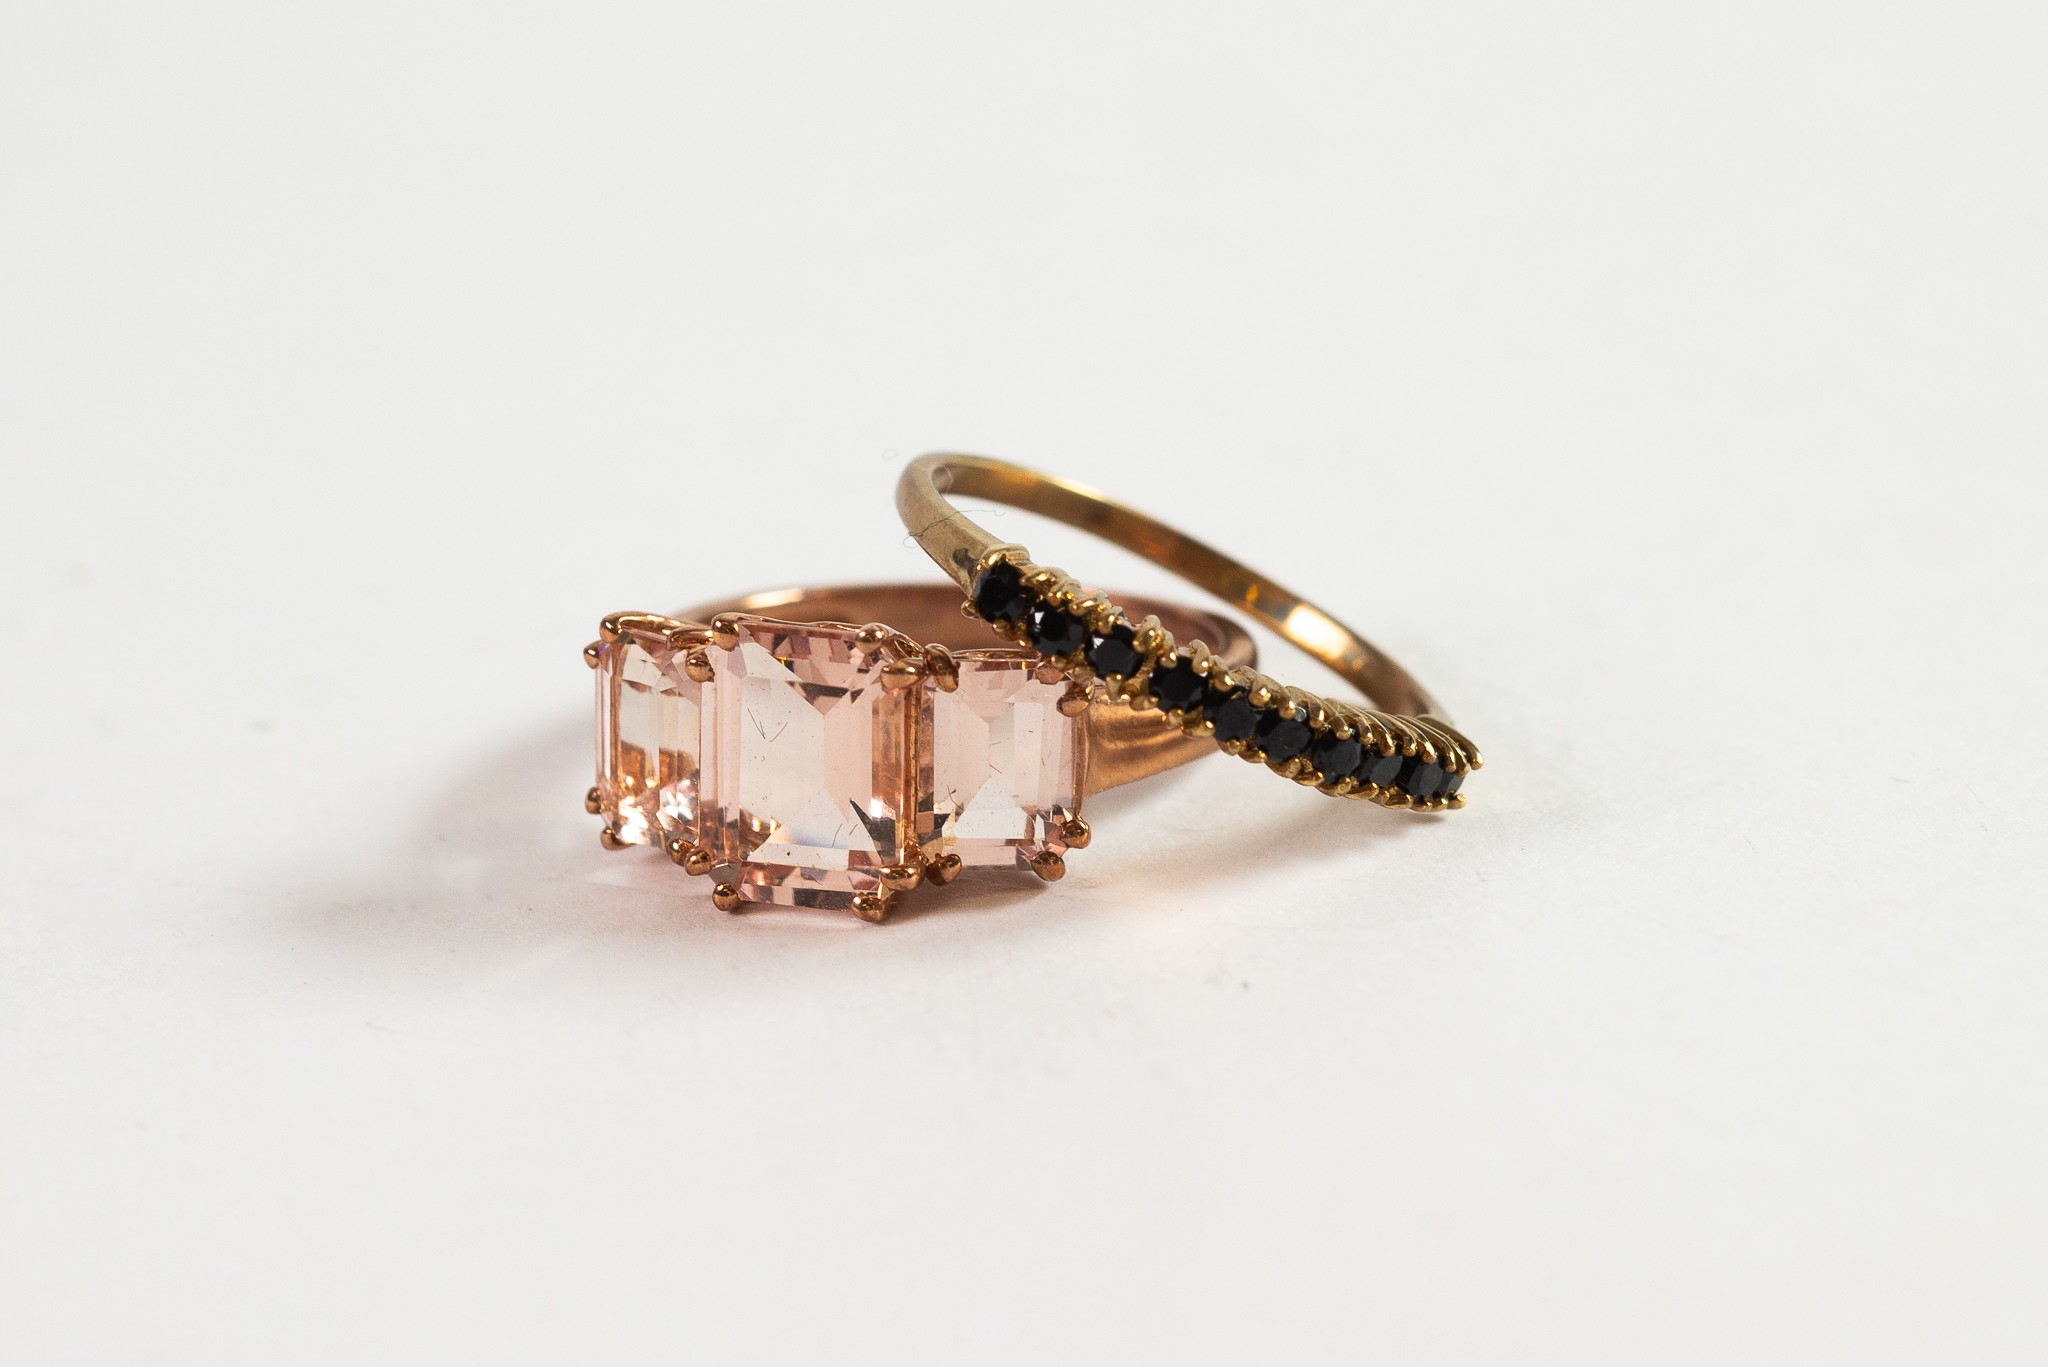 9ct GOLD RING set with three emerald cut morganite stones and 9ct GOLD RING set with a row of ten